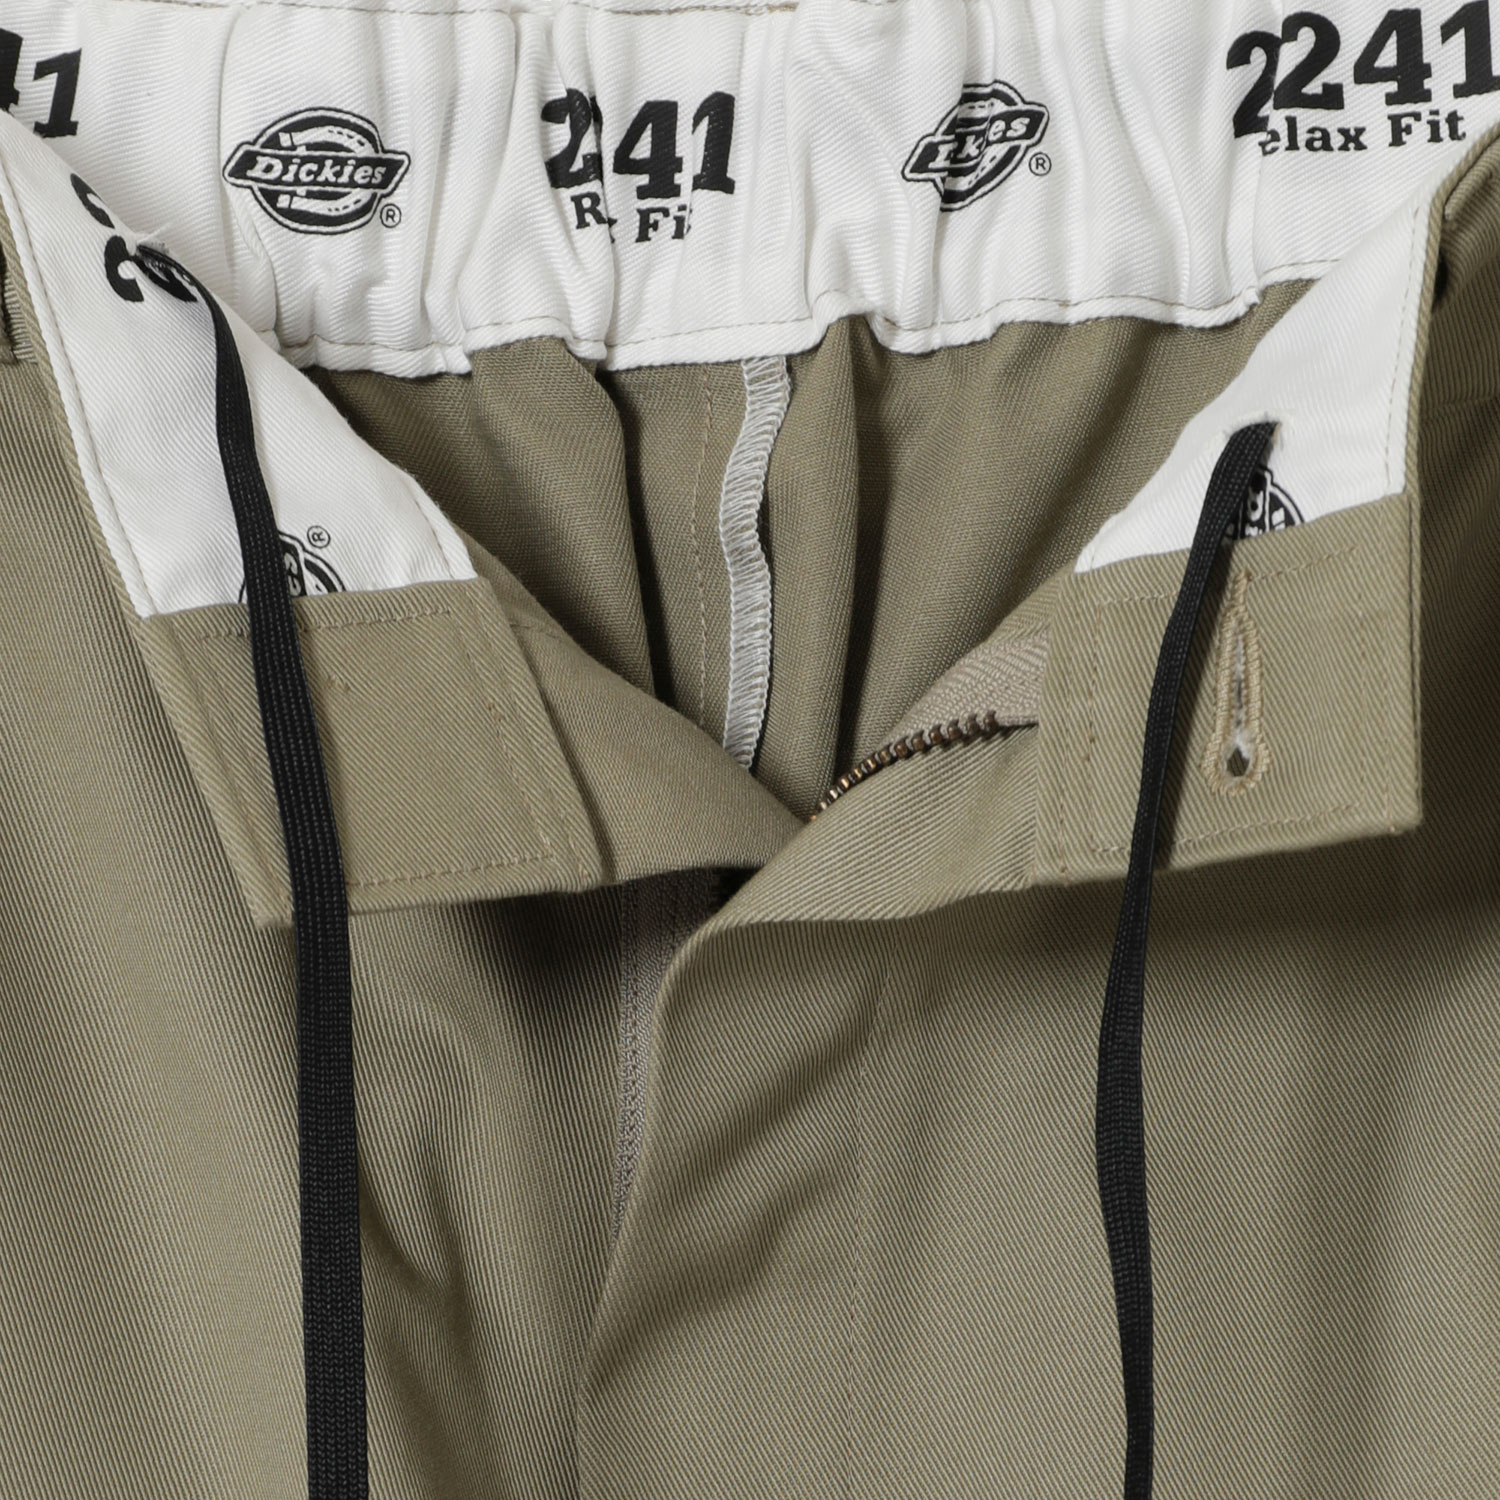 Dickies x N.HOOLYWOOD COMPILE ペインターパンツ "2241" image number 2